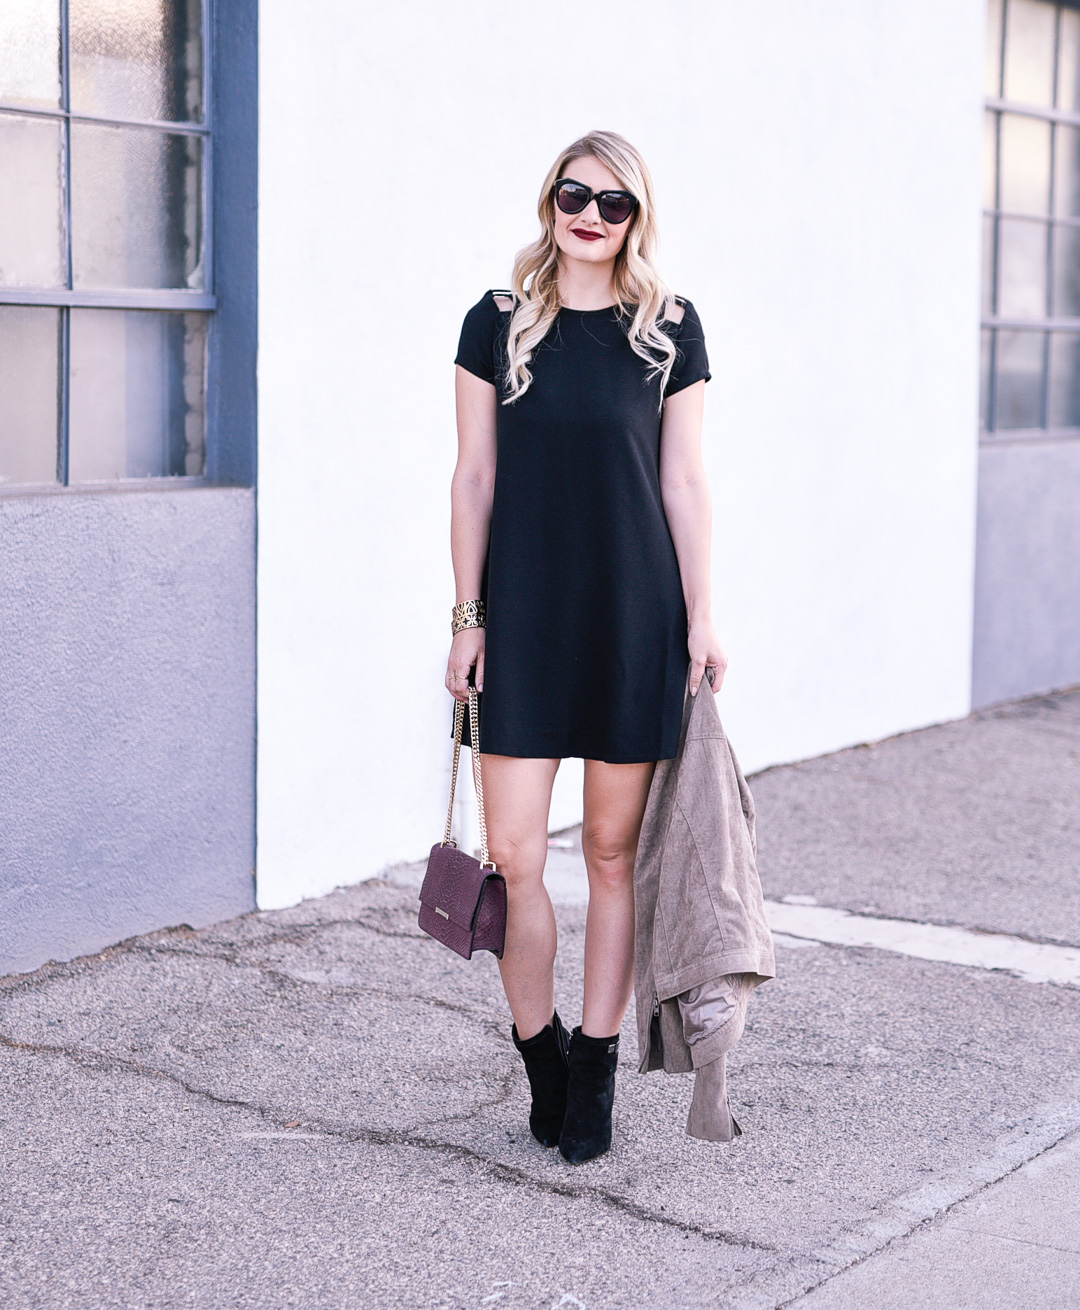 Jenna Colgrove wearing a Speechless Shoulder Cut Out Shift Dress in black.